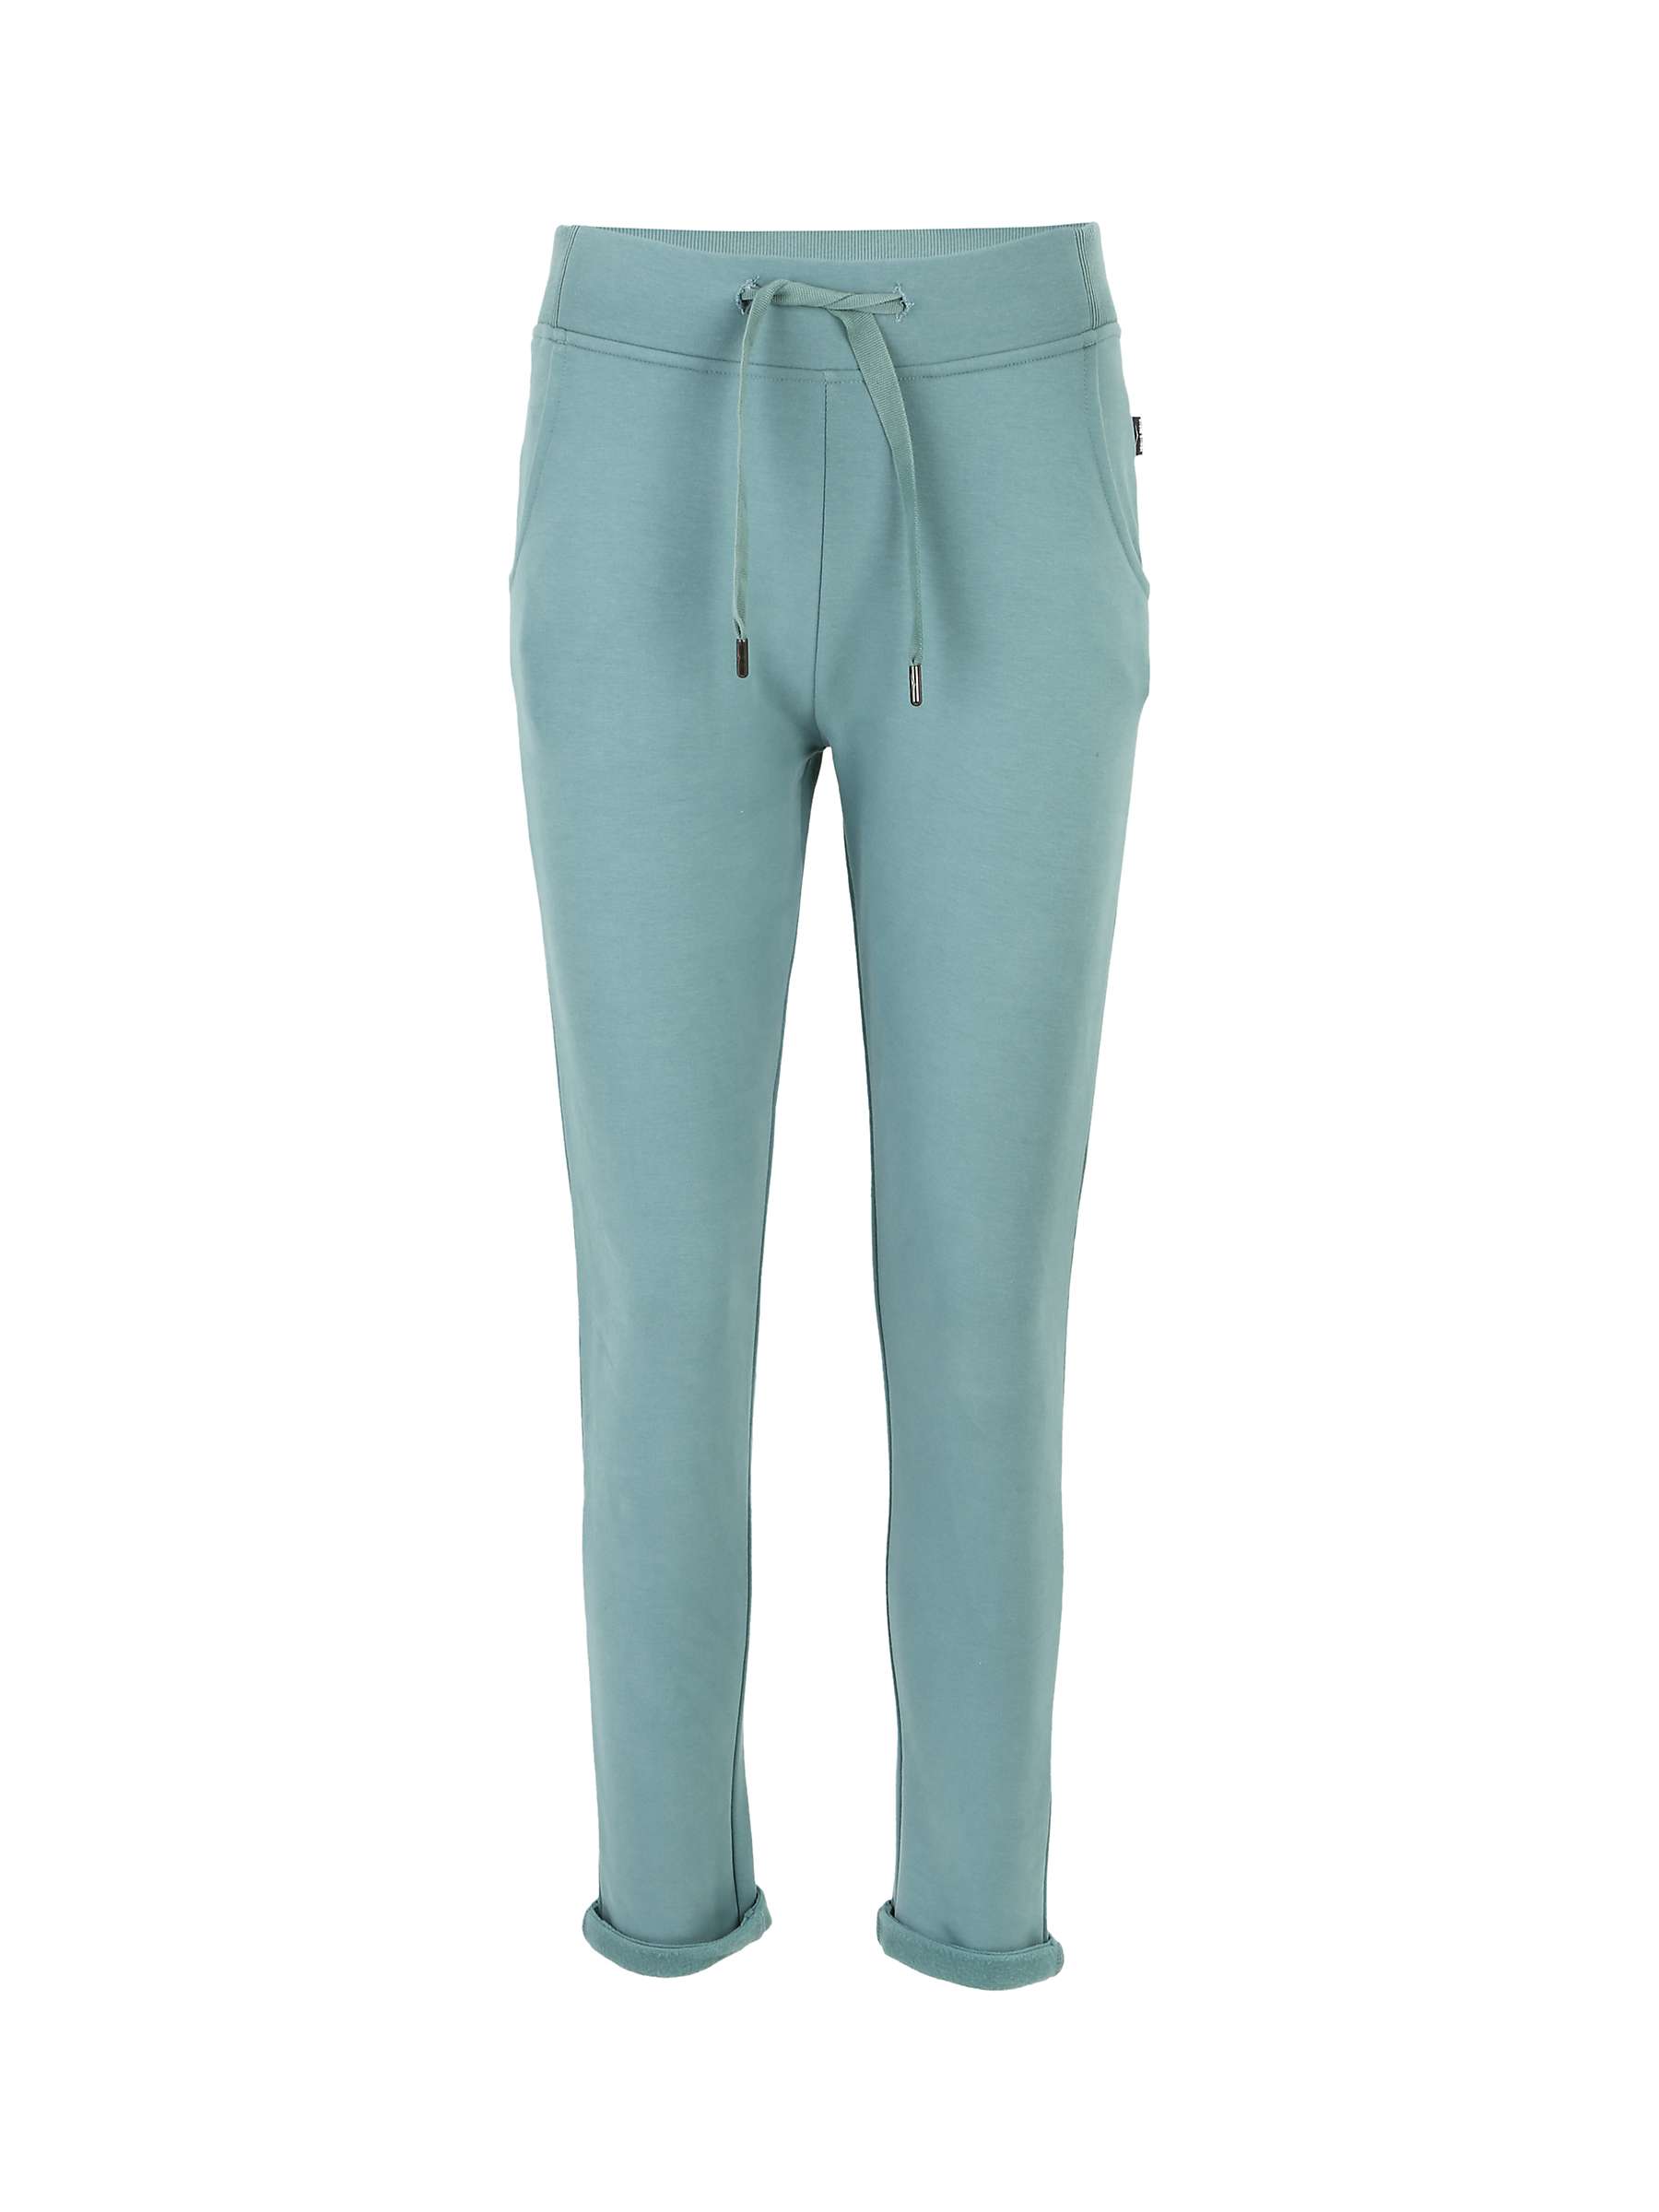 Buy Venice Beach Sherly Cotton Blend Joggers Online at johnlewis.com